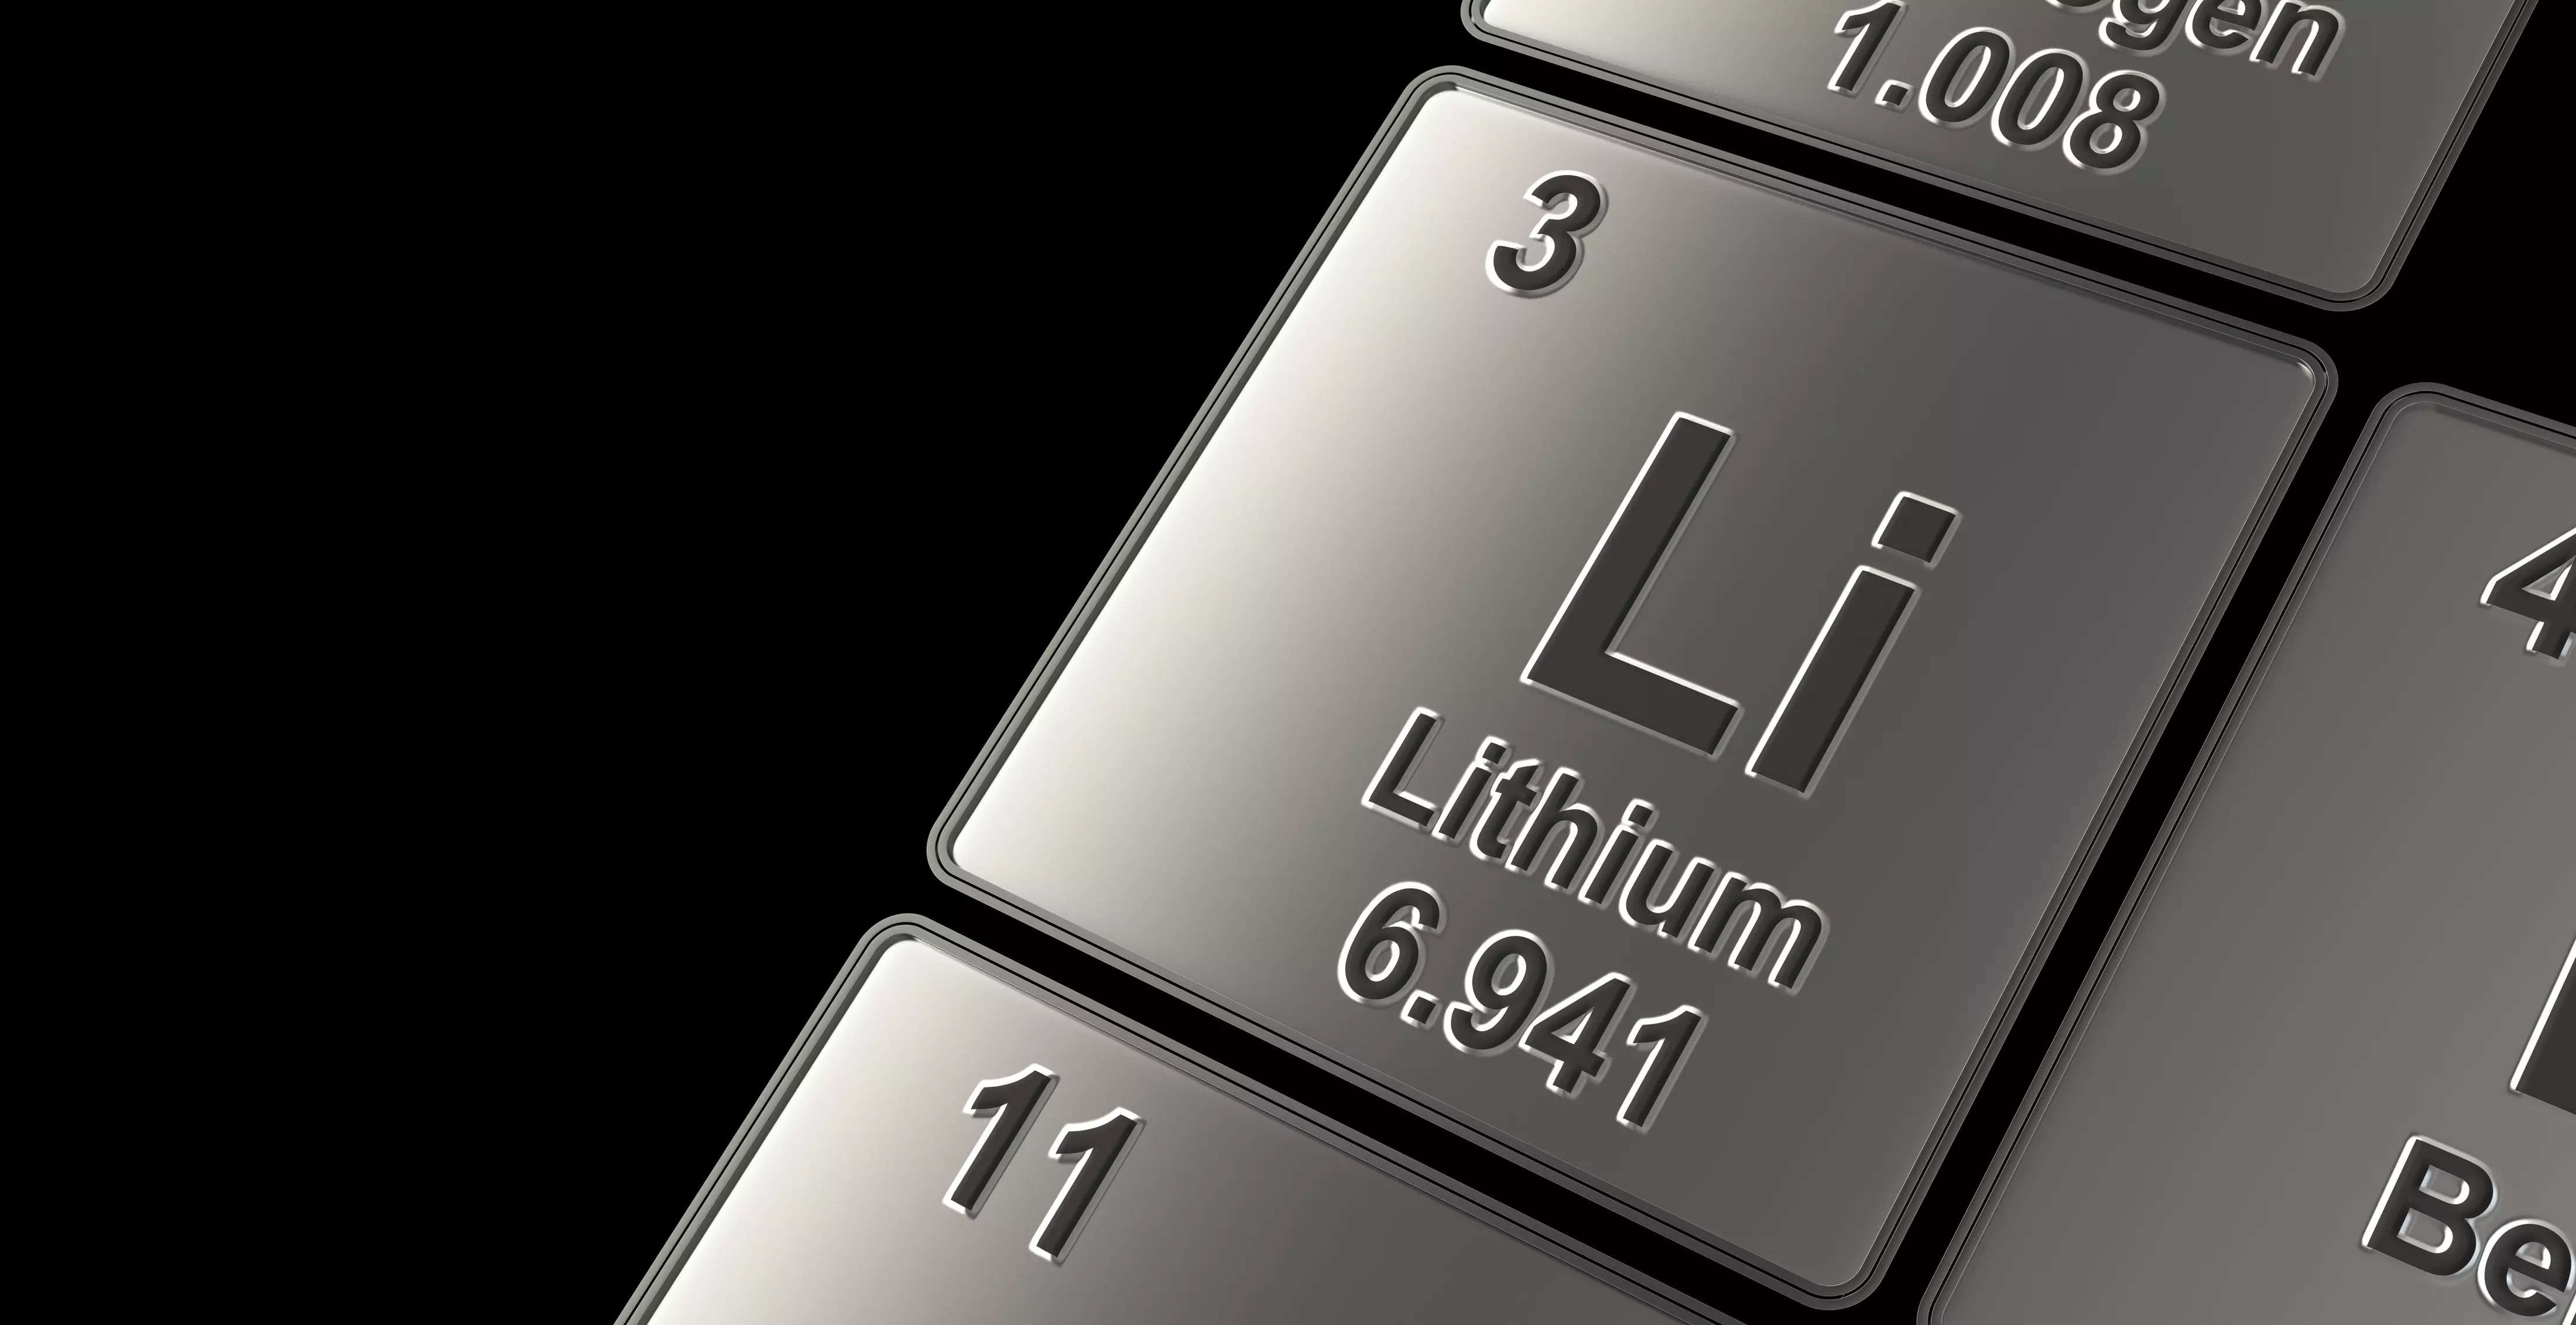 Lithium Carbonate: Lithium still super-charged as supply chases